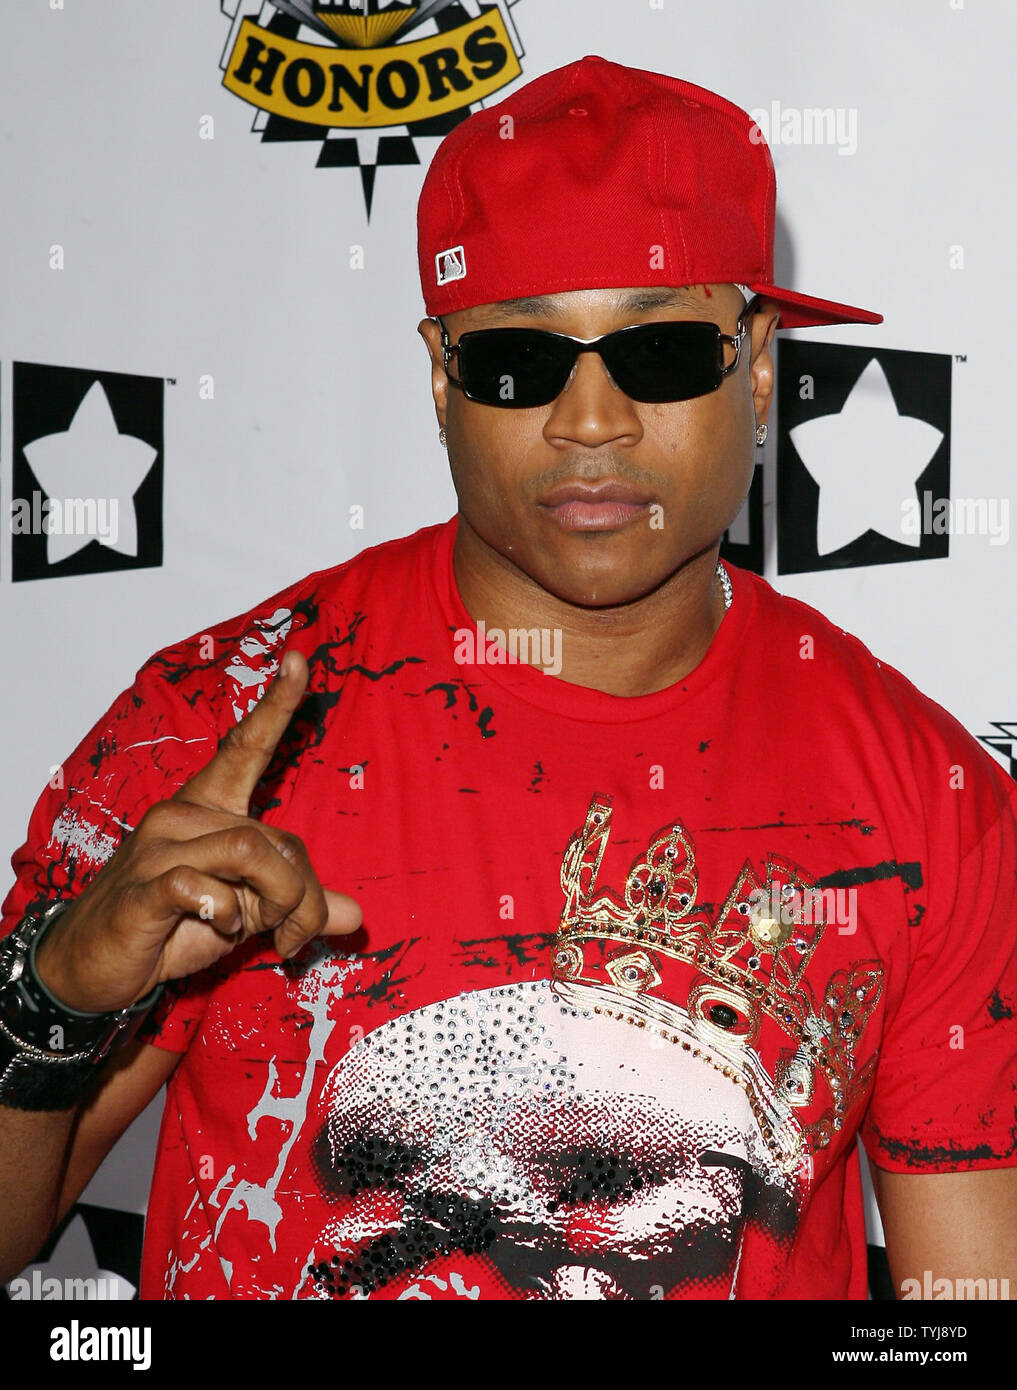 LL Cool J arrives on the red carpet before the taping of the 'VH1 Hip Hop Honors' at the Hammerstein Ballroom in New York City on October 4, 2007.  (UPI Photo/John Angelillo) Stock Photo